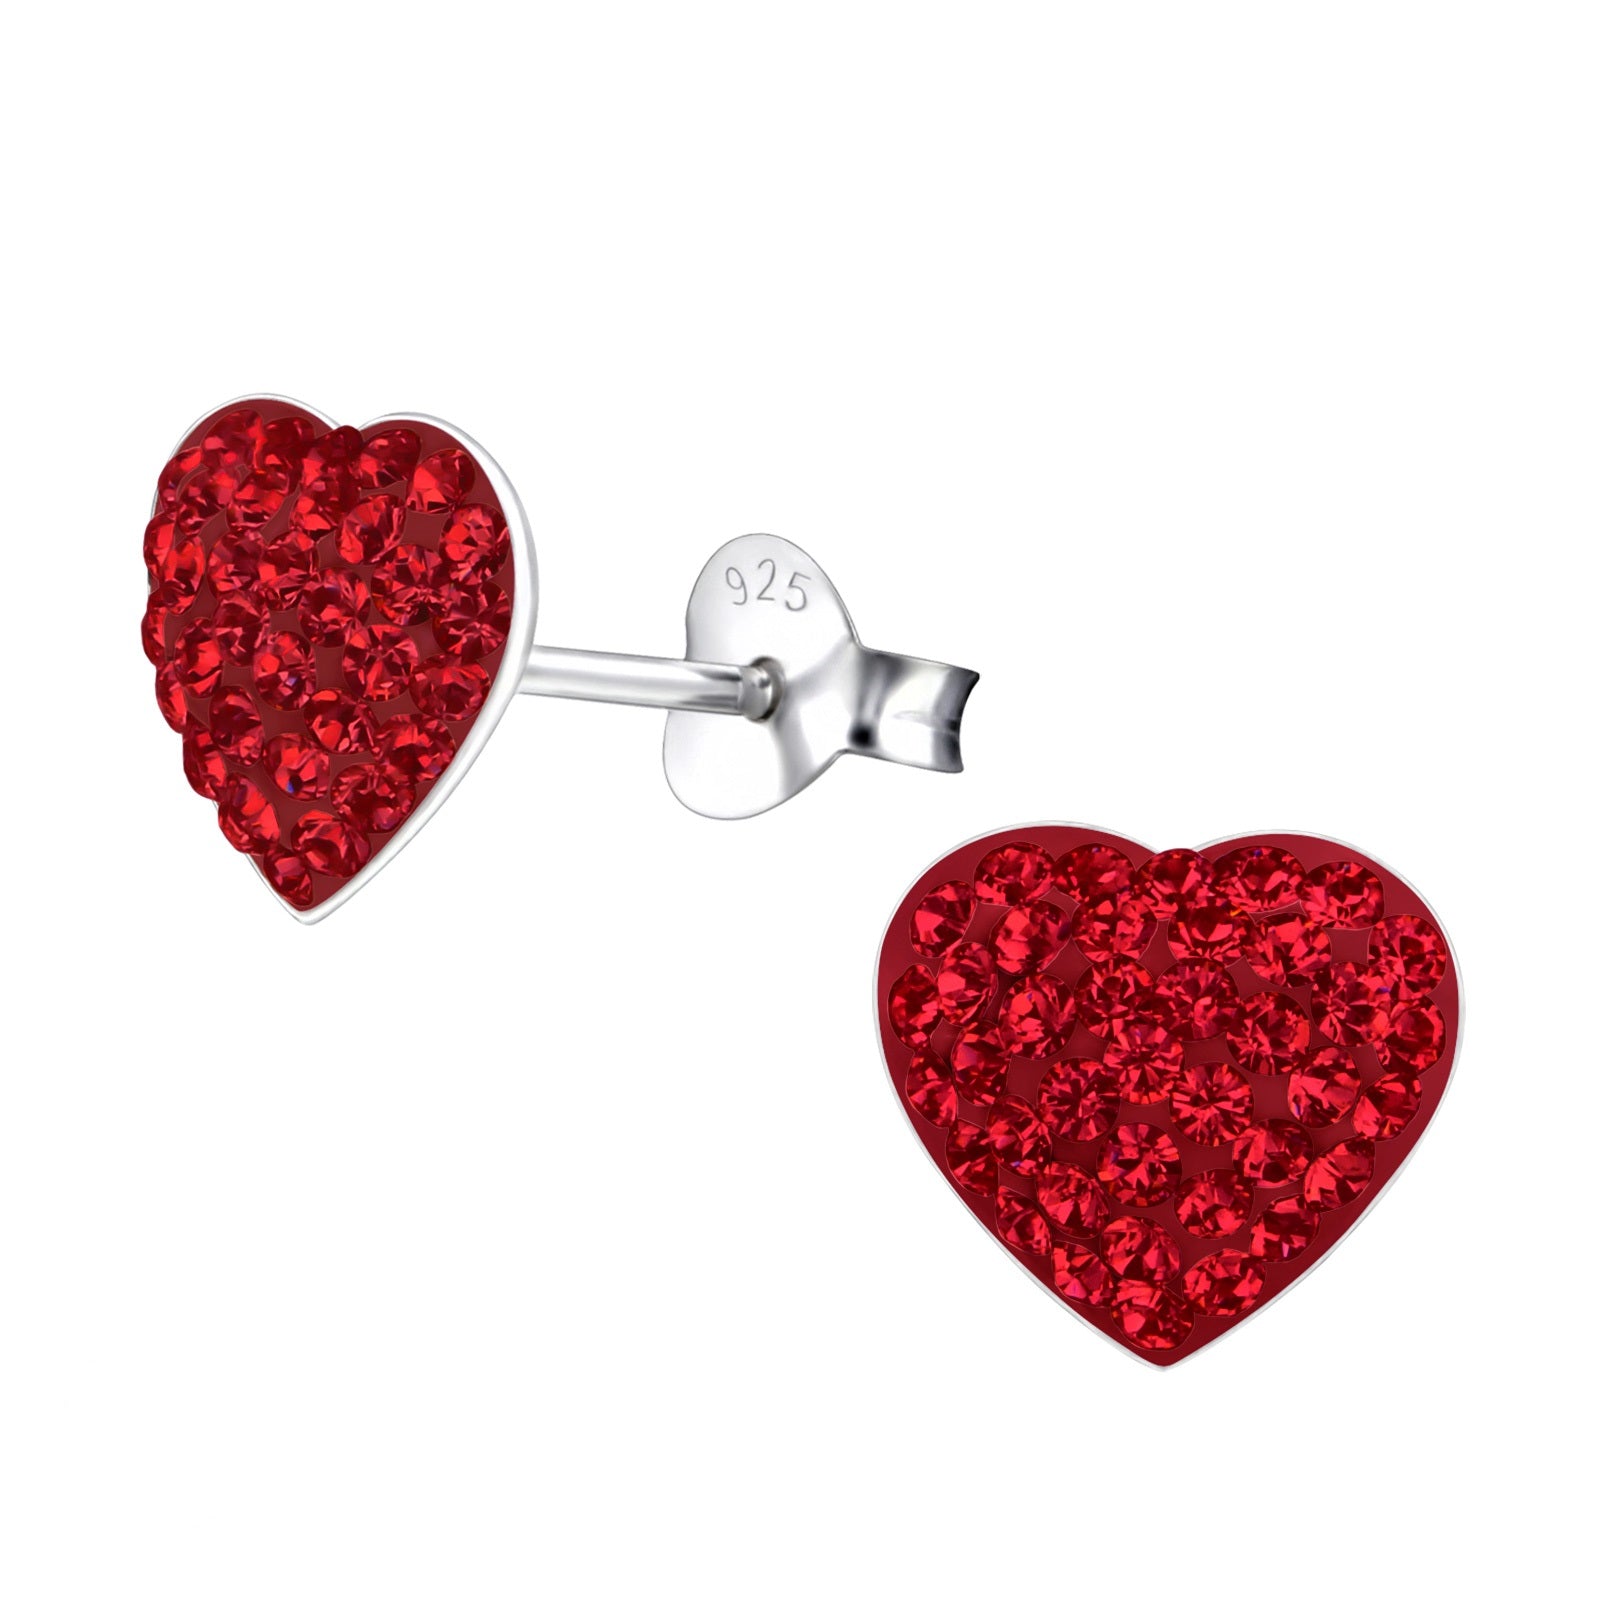 Buy Yellow Chimes Crystals From Swarovski Heart Shaped Stud Earrings online